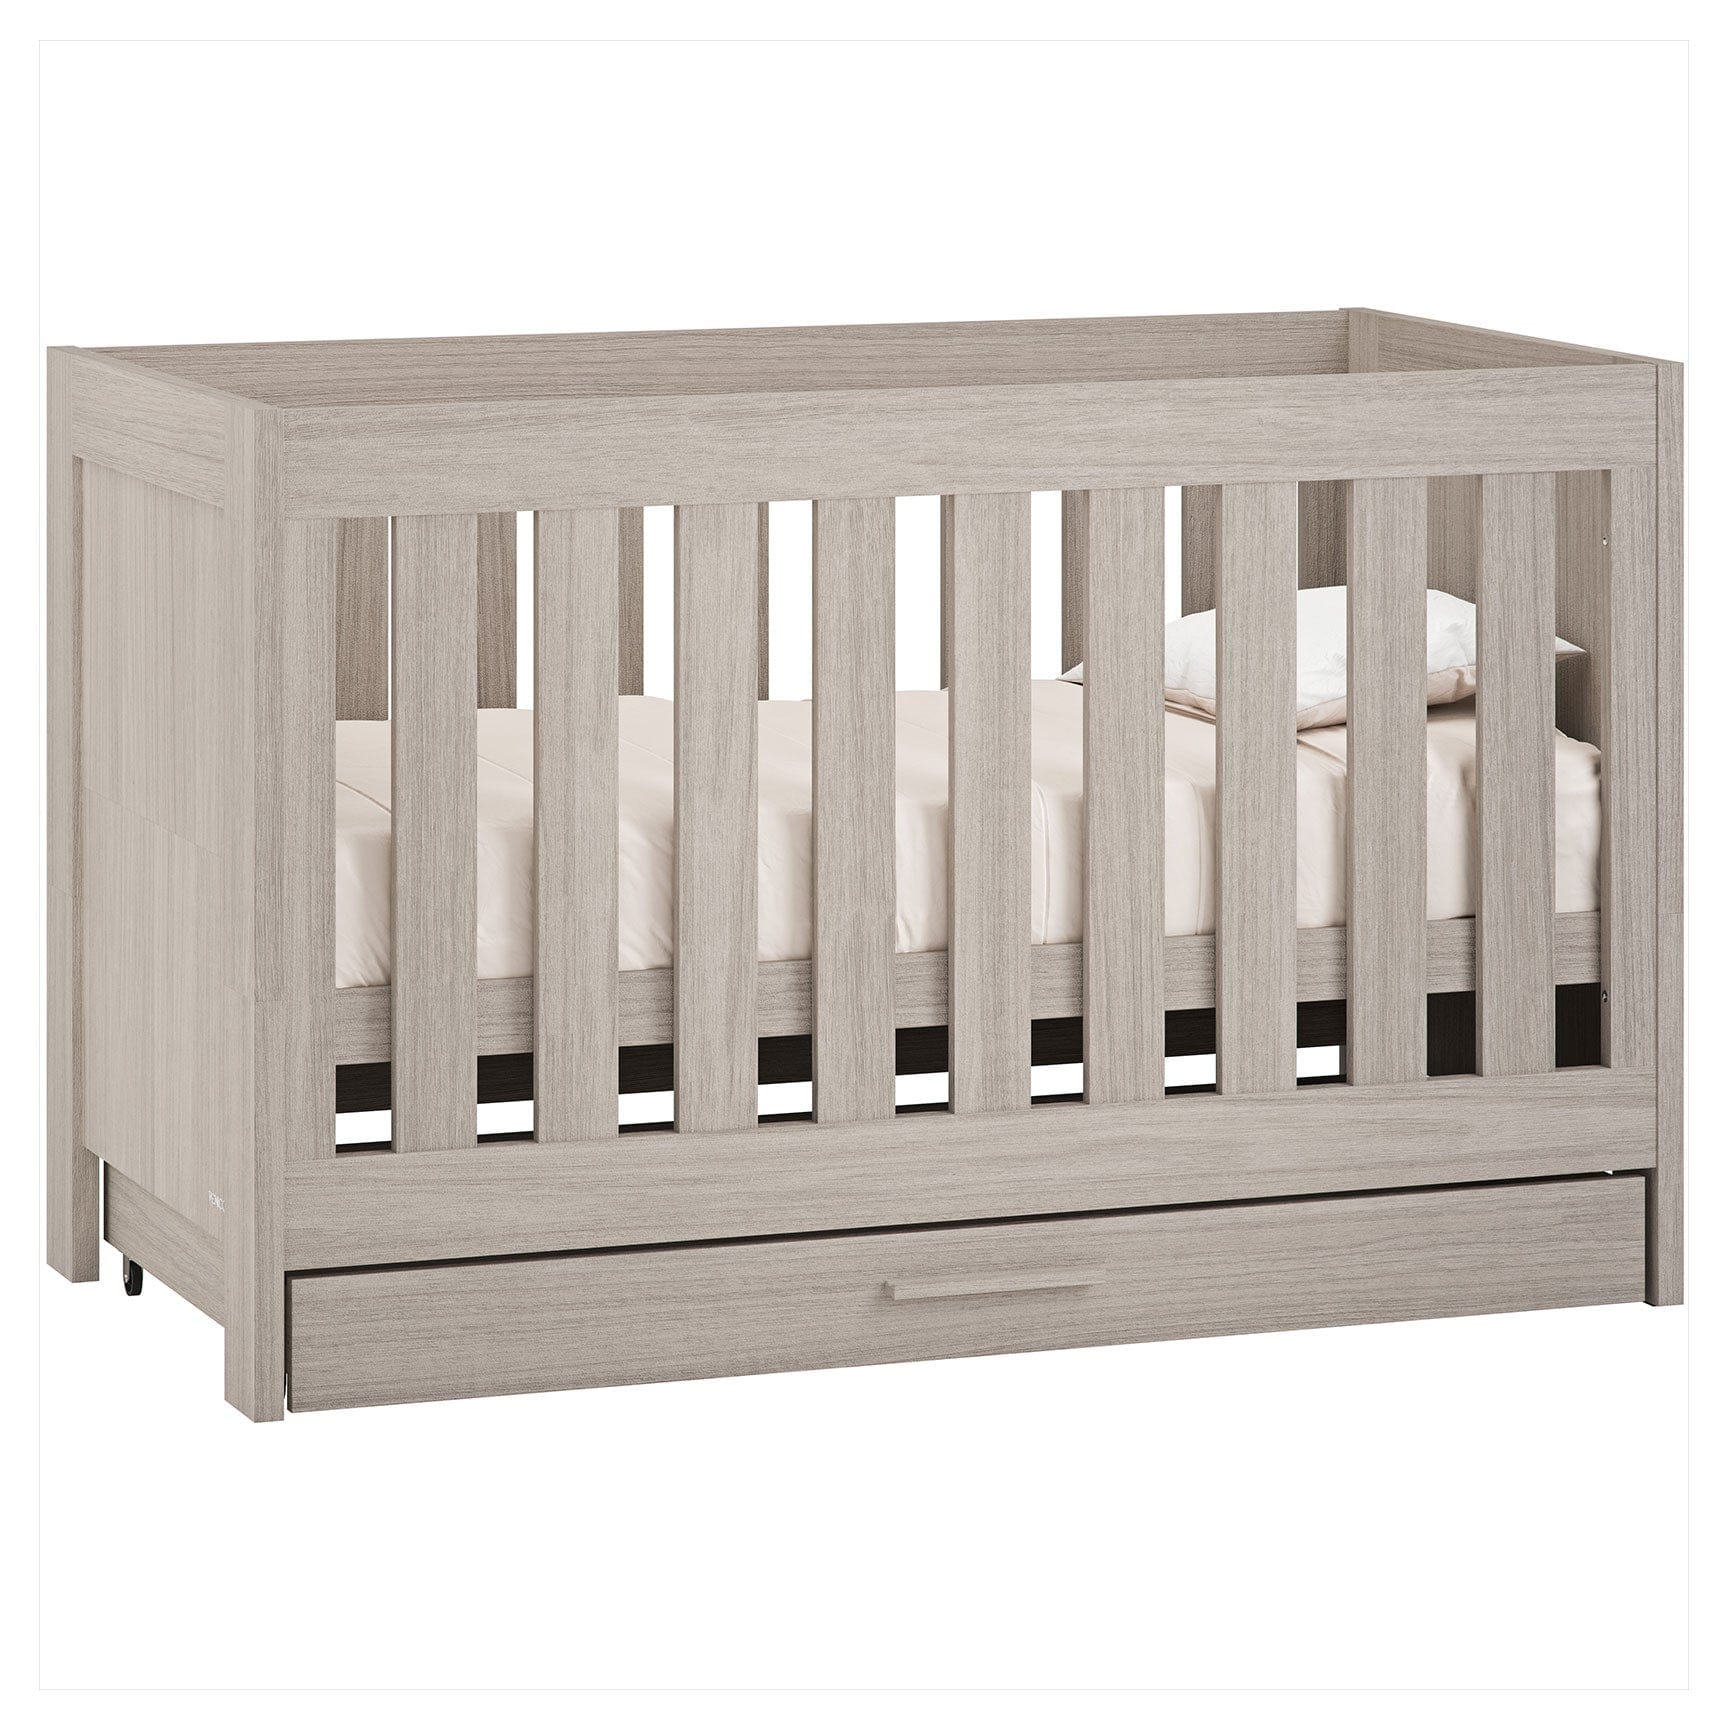 Venicci Forenzo Oak Cot Bed with Drawer in Nordic White Cot Beds